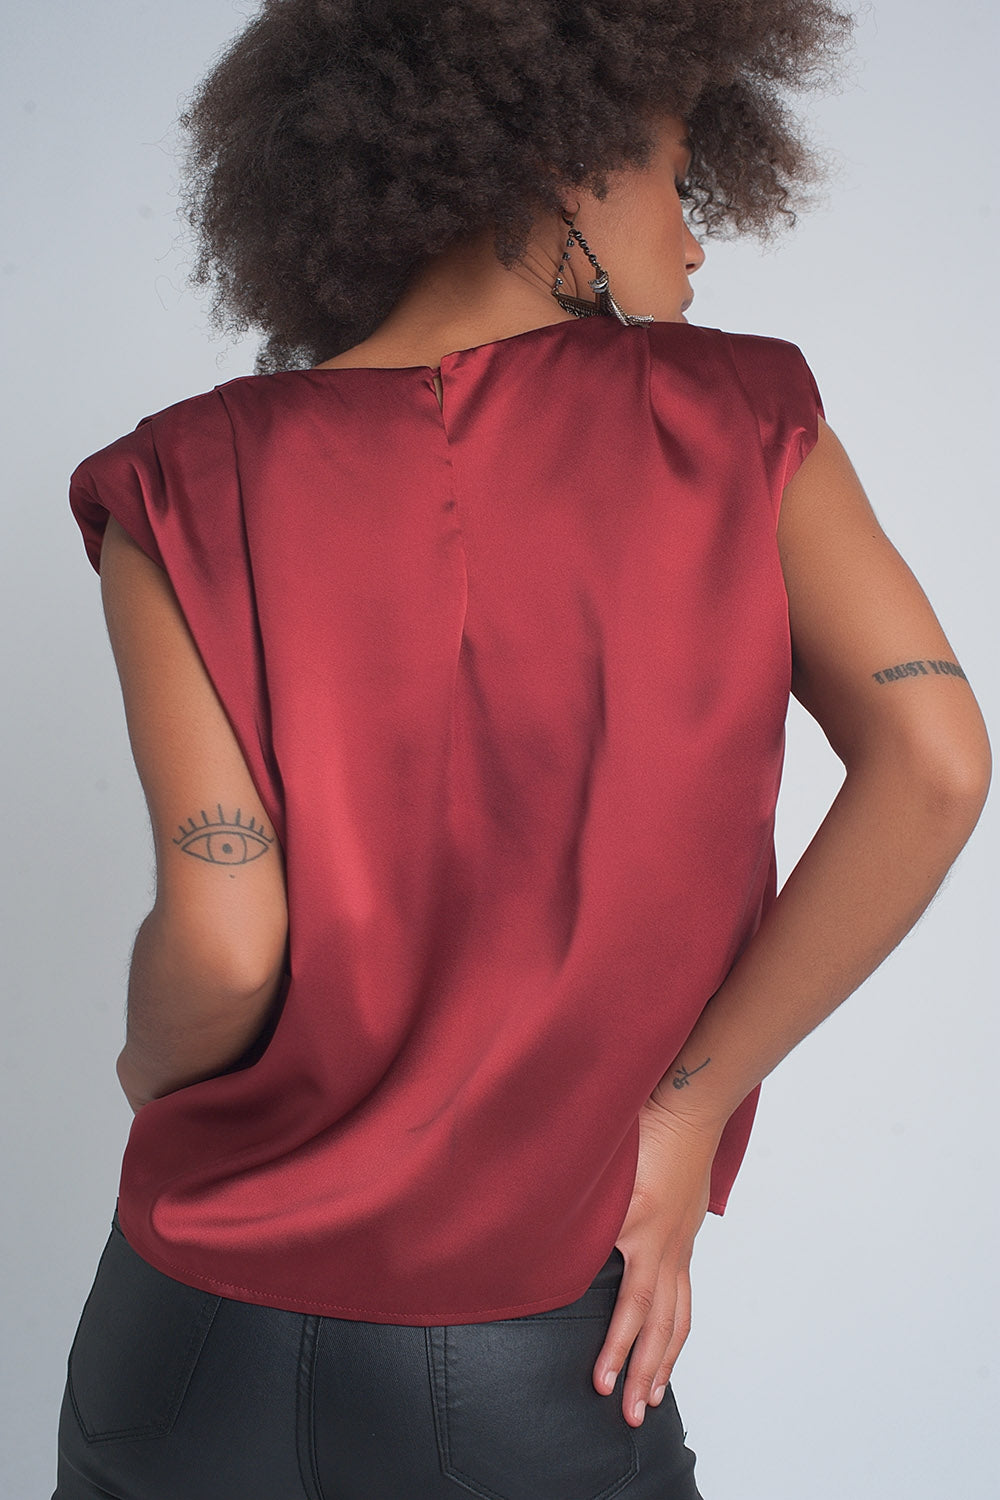 Gathered satin shoulder pad sleeveless top in red Szua Store